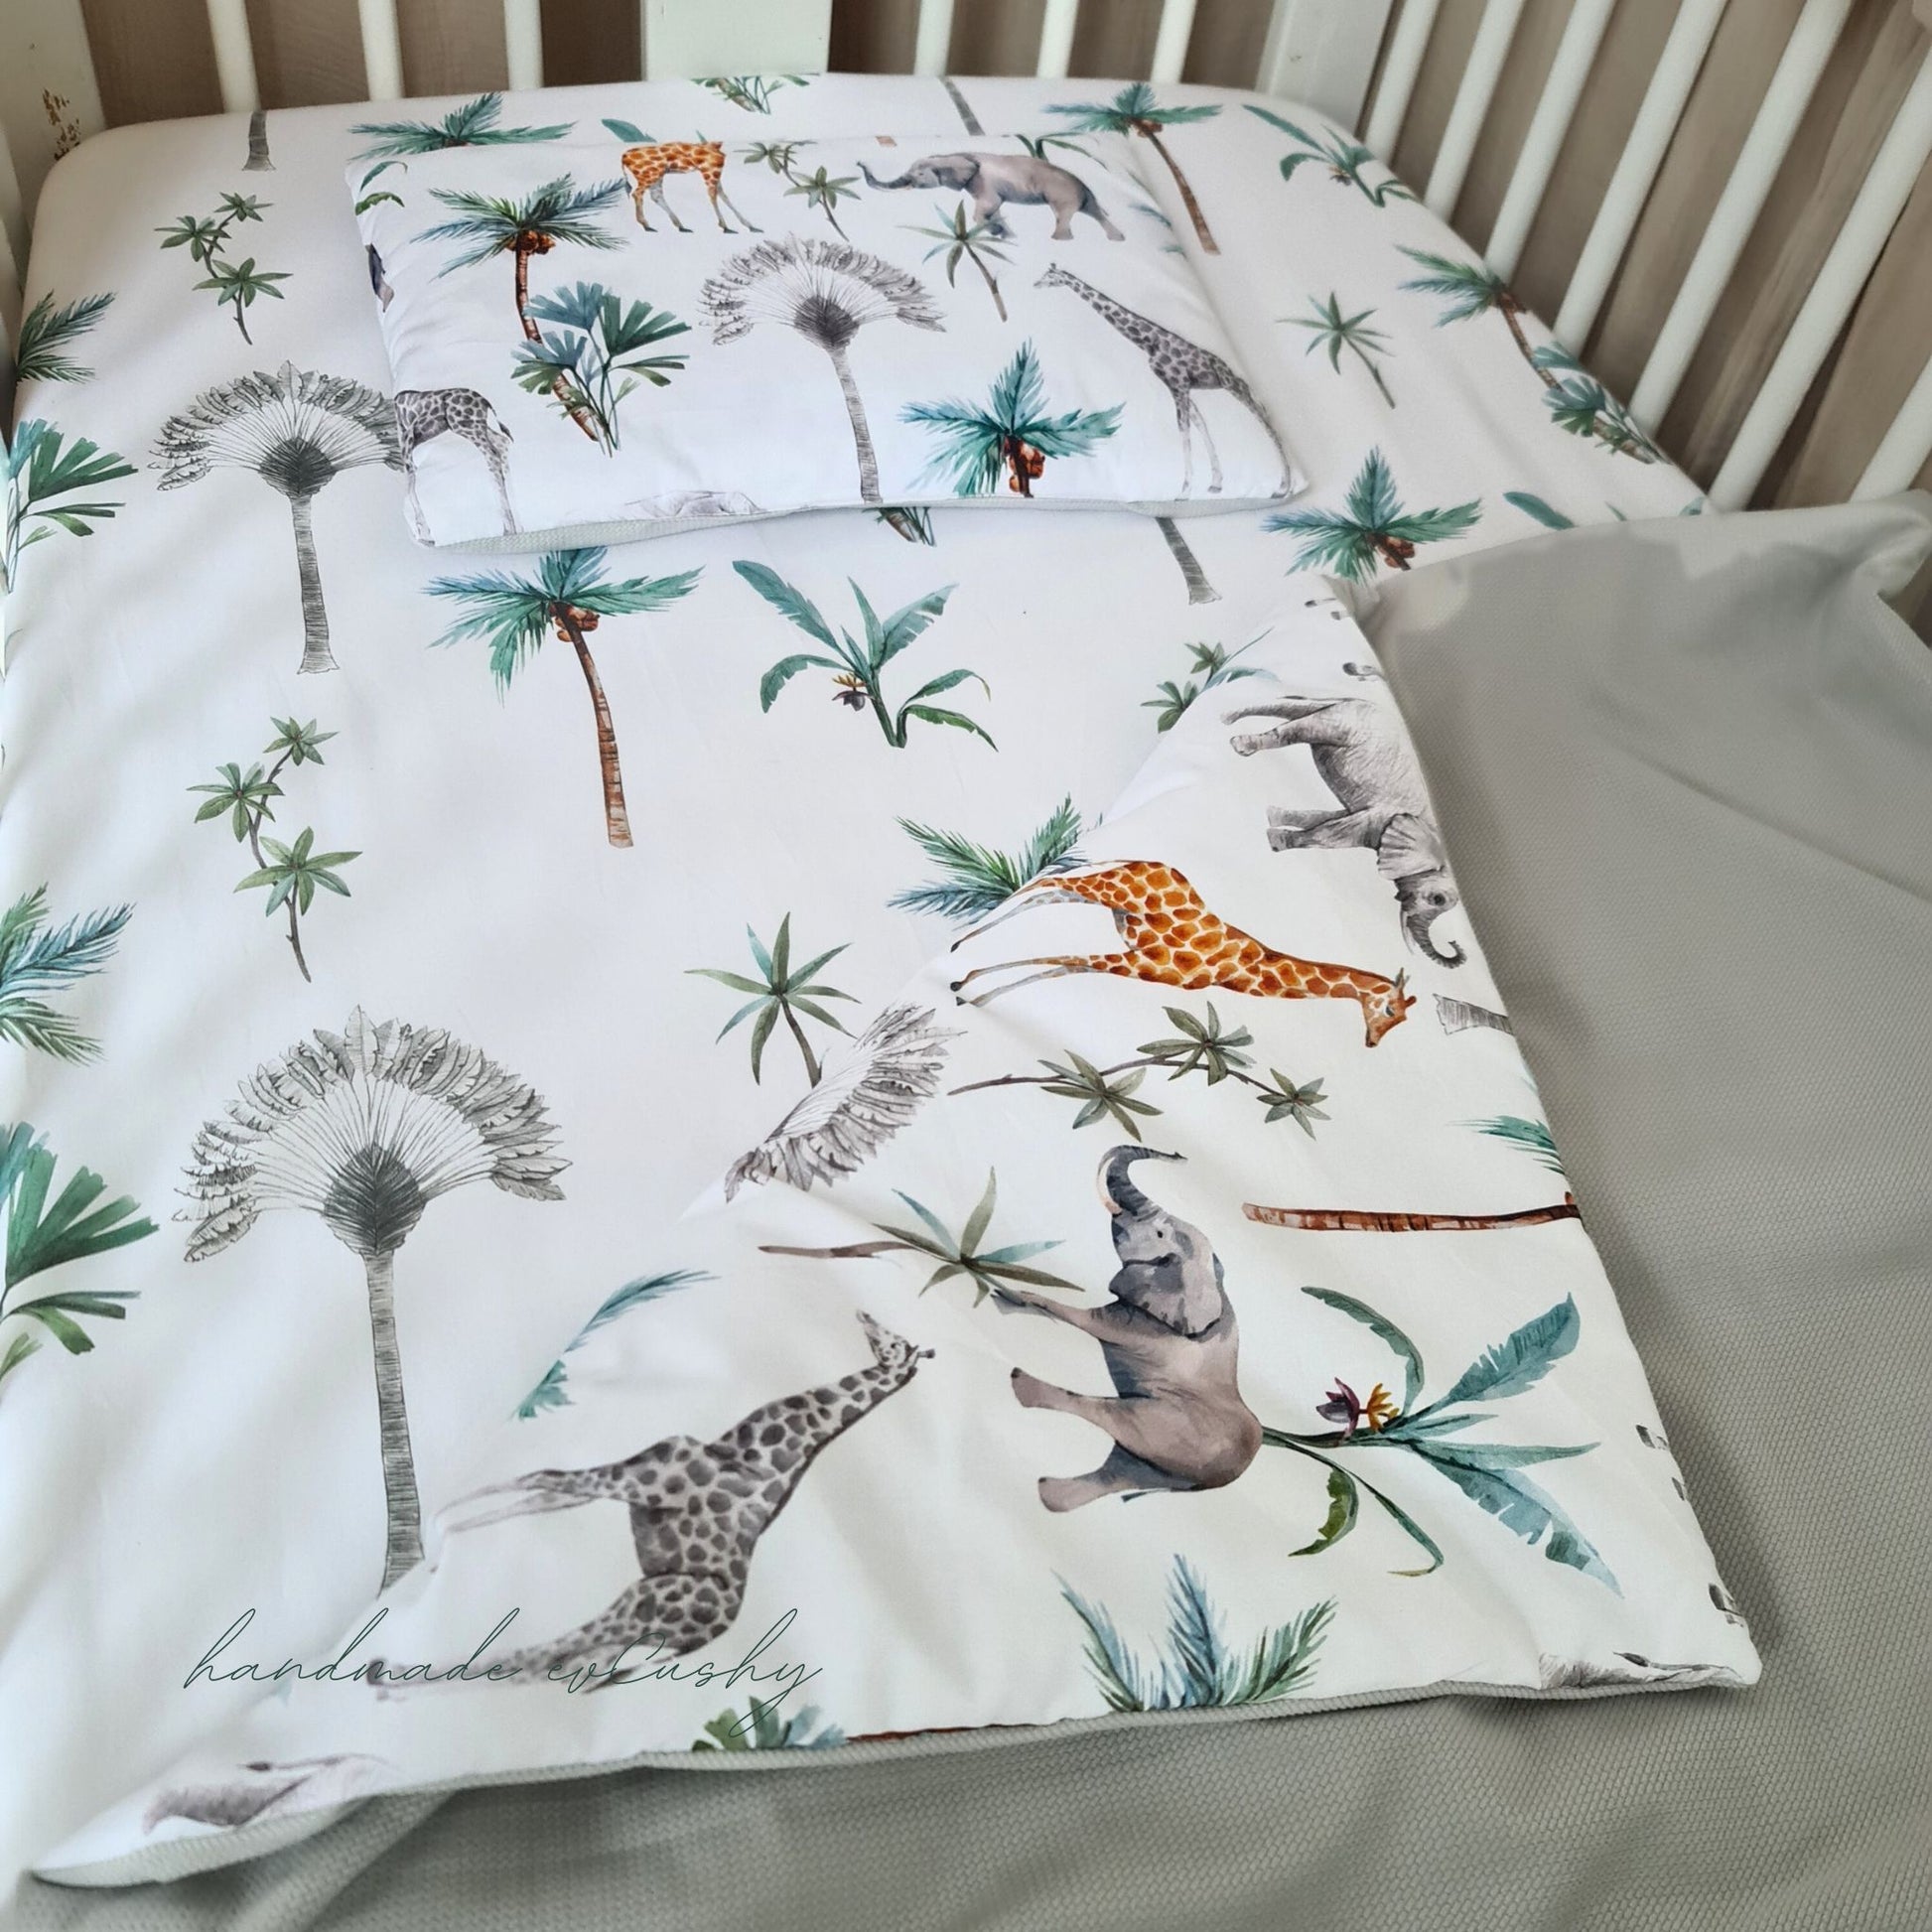 "Image of a newborn set with a charming grey and safari patterned cotton quilt and pillow, enhanced with luxuriously soft velvet for ultimate comfort." in the baby cot